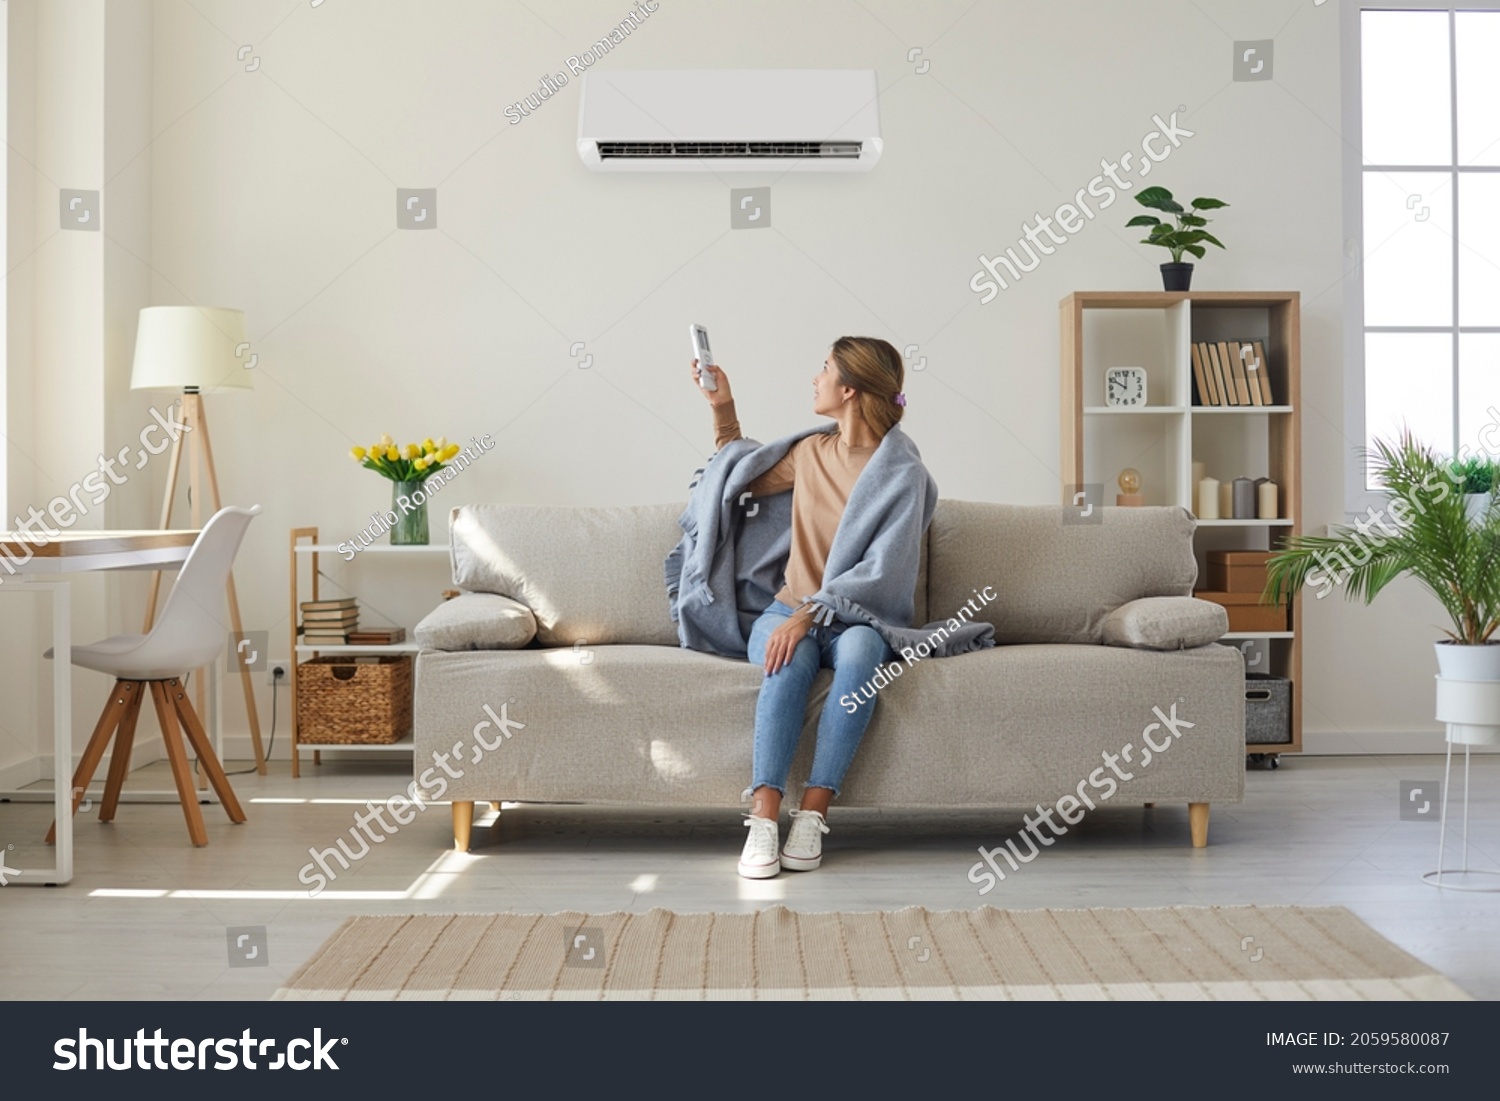 Woman who's sitting on sofa under warm plaid in living room switches off her air conditioner on wall. Young girl adjusting modern AC system, regulating temperature and enjoying cool fresh air at home #2059580087